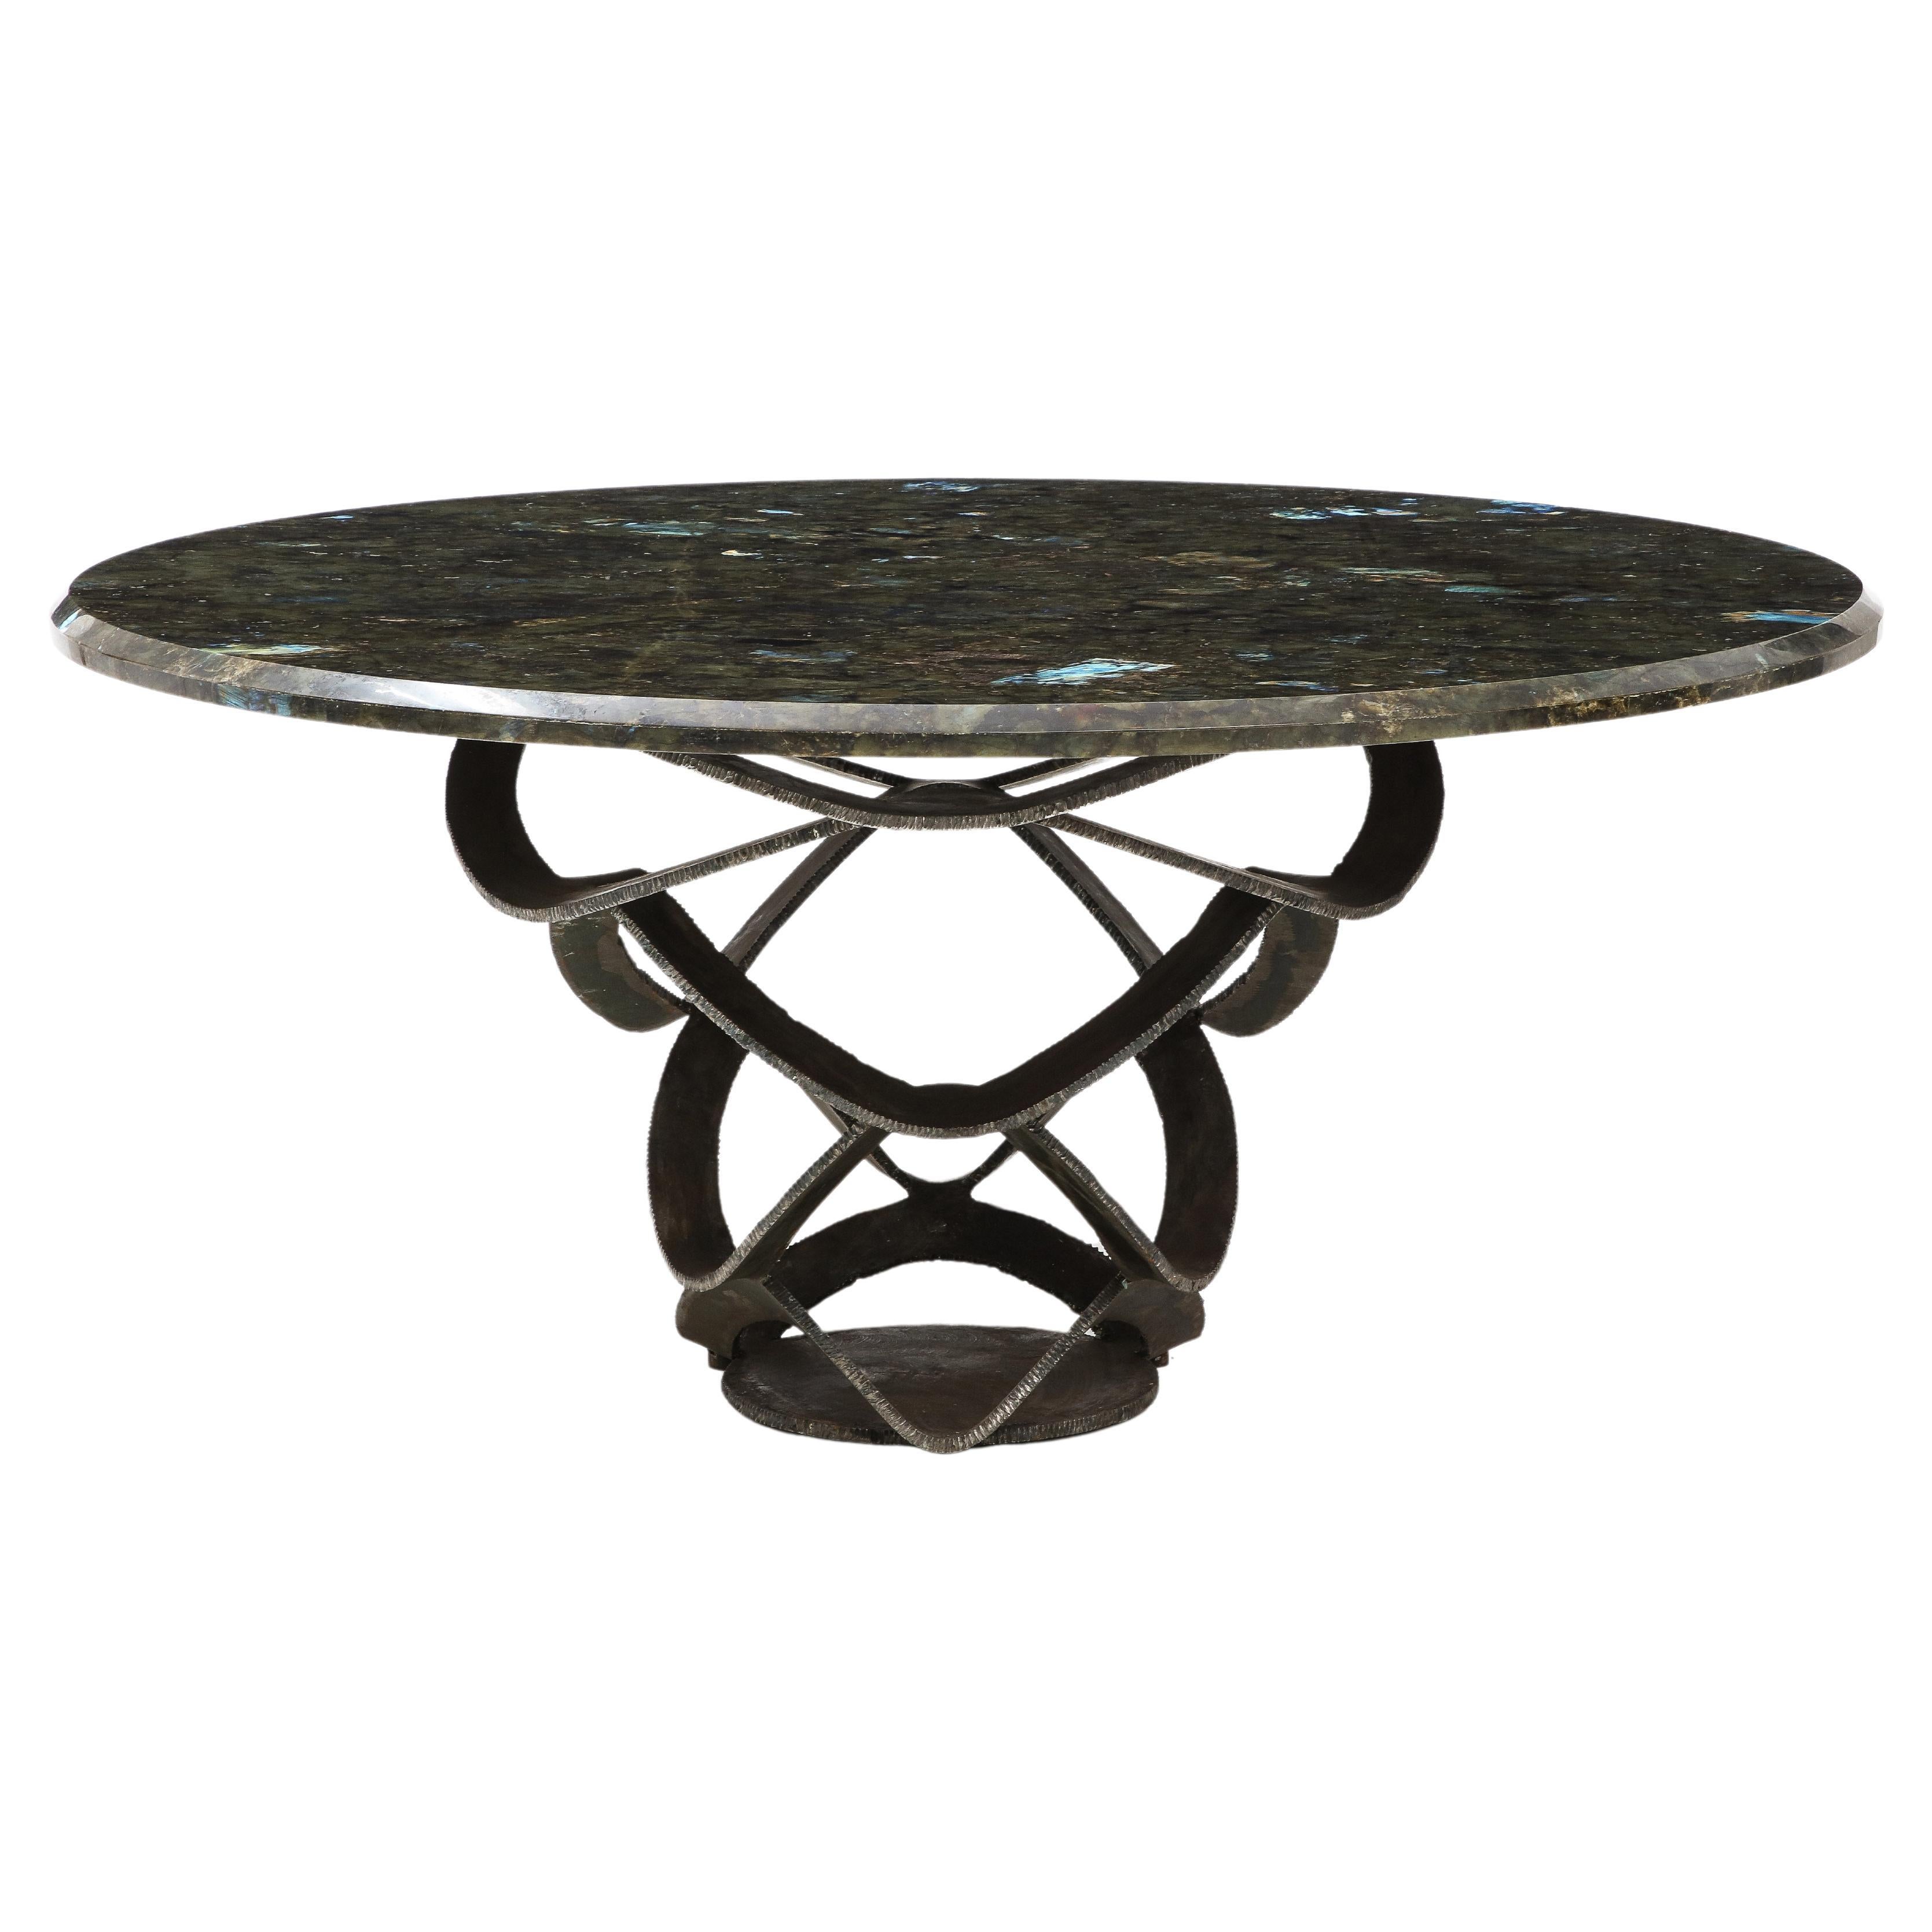 Spectacular 1970's Mid Century Modern Forged Steel and Labradorite Stone Table For Sale